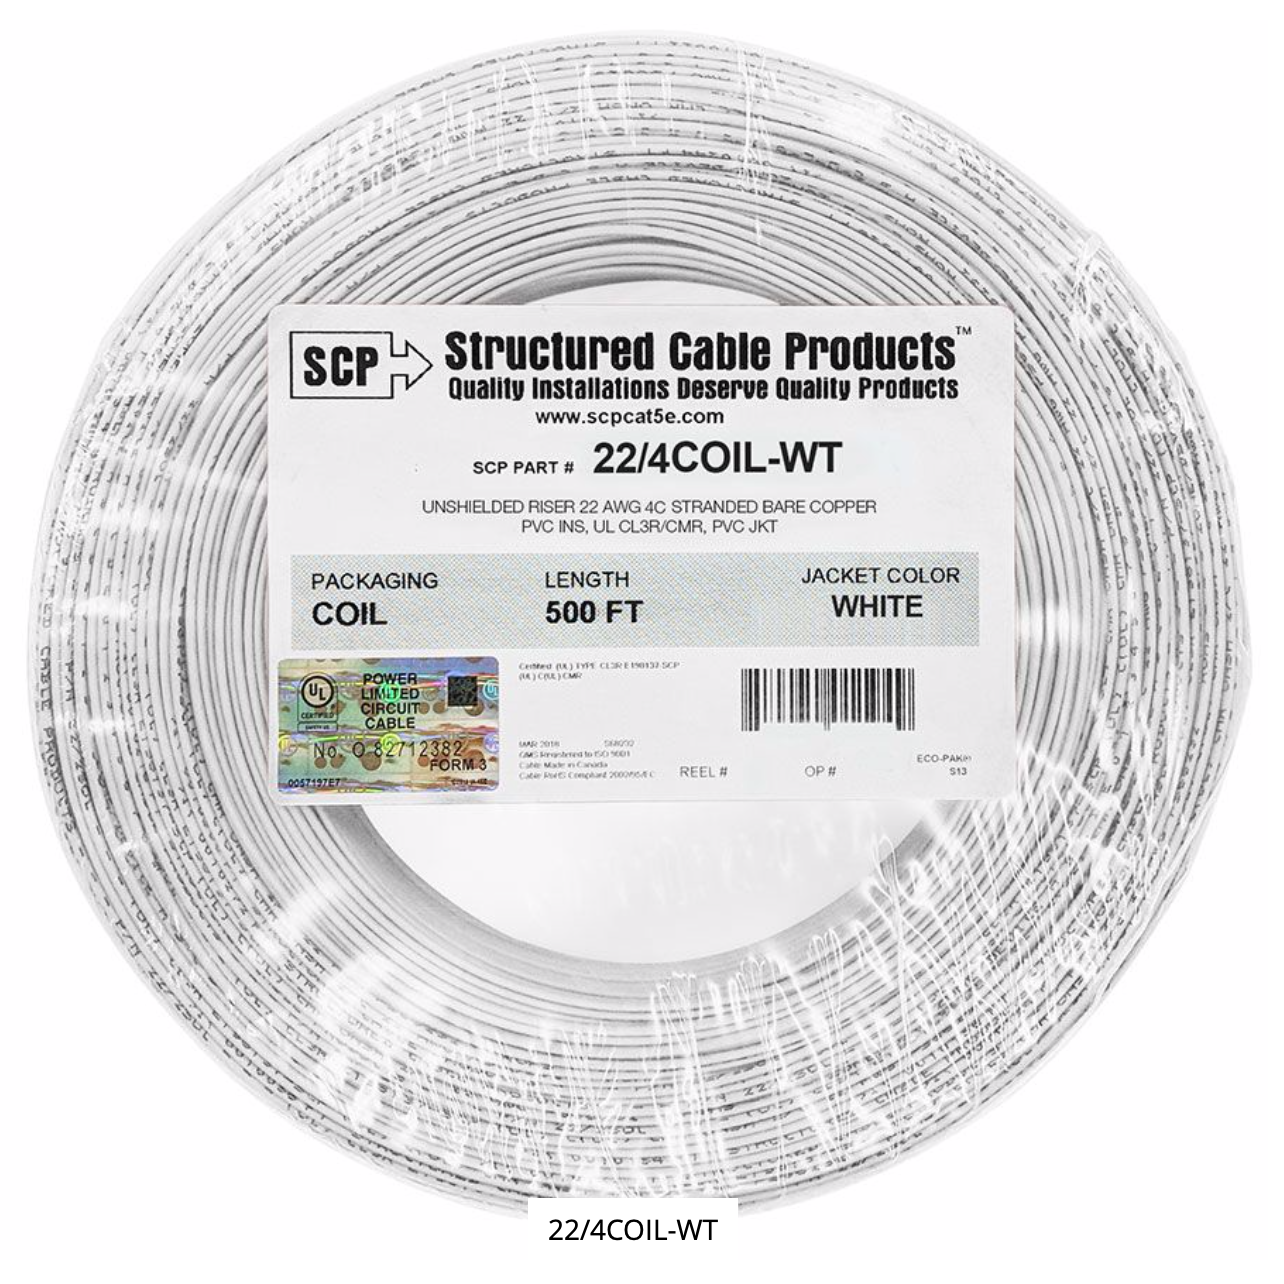 22/4COIL-WT   4C/22 AWG STRANDED PVC COIL PACK Security Alarm Cable WHITE - 500 FT